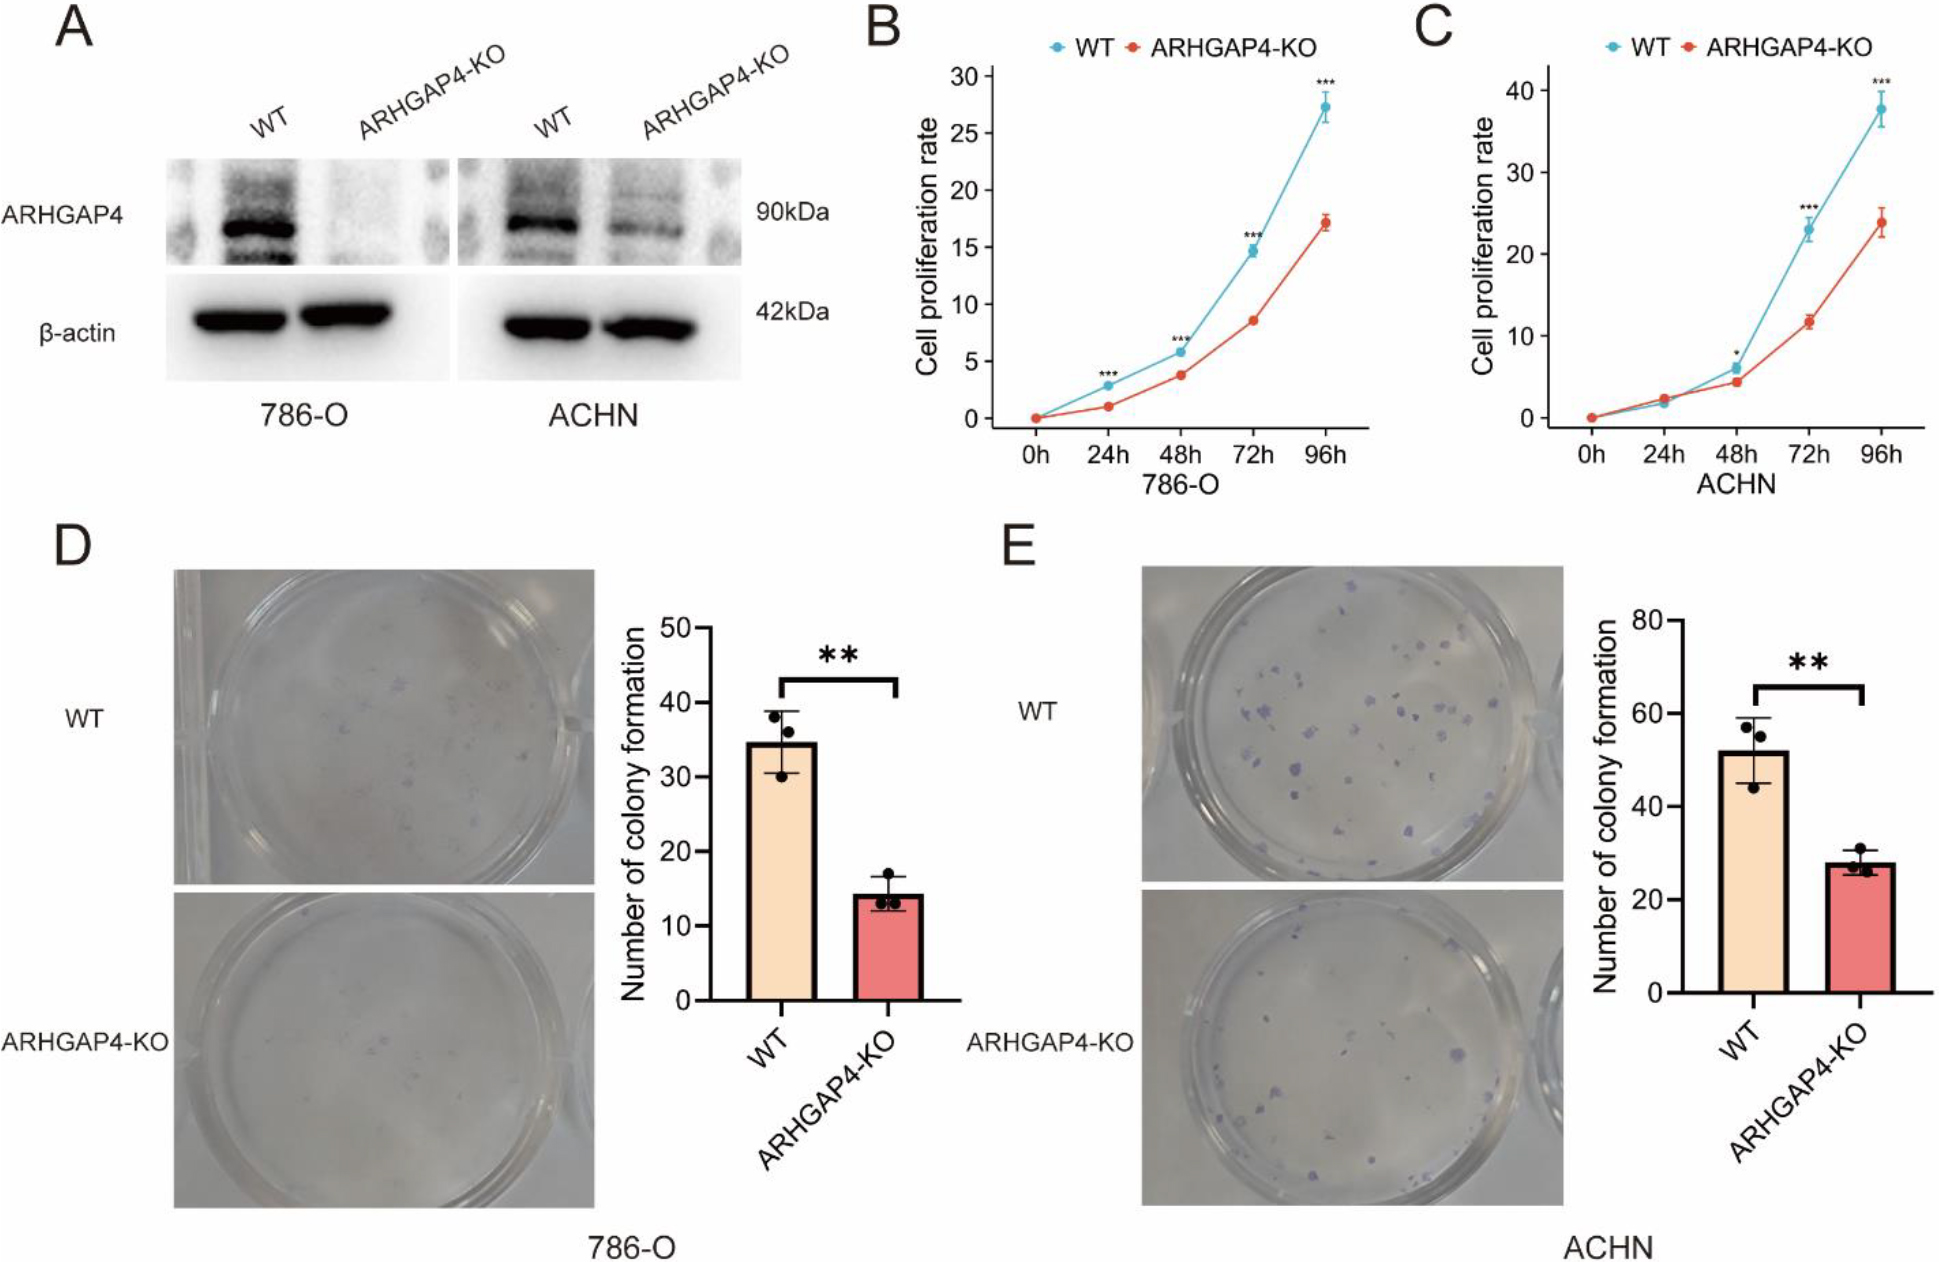 Verification of the effect of ARHGAP4 on growth and proliferation in vitro. (A) Expression of ARHGAP4 protein in 786-O and ACHN cells in control group and ARHGAP4-KO group. (B, C) Cell proliferation rate of control group and ARHGAP4-KO group in 786-O and ACHN cells. (D, E) Number of colonies in control group and ARHGAP4-KO group in 786-O and ACHN cells. **p < 0.01; ***p < 0.001.